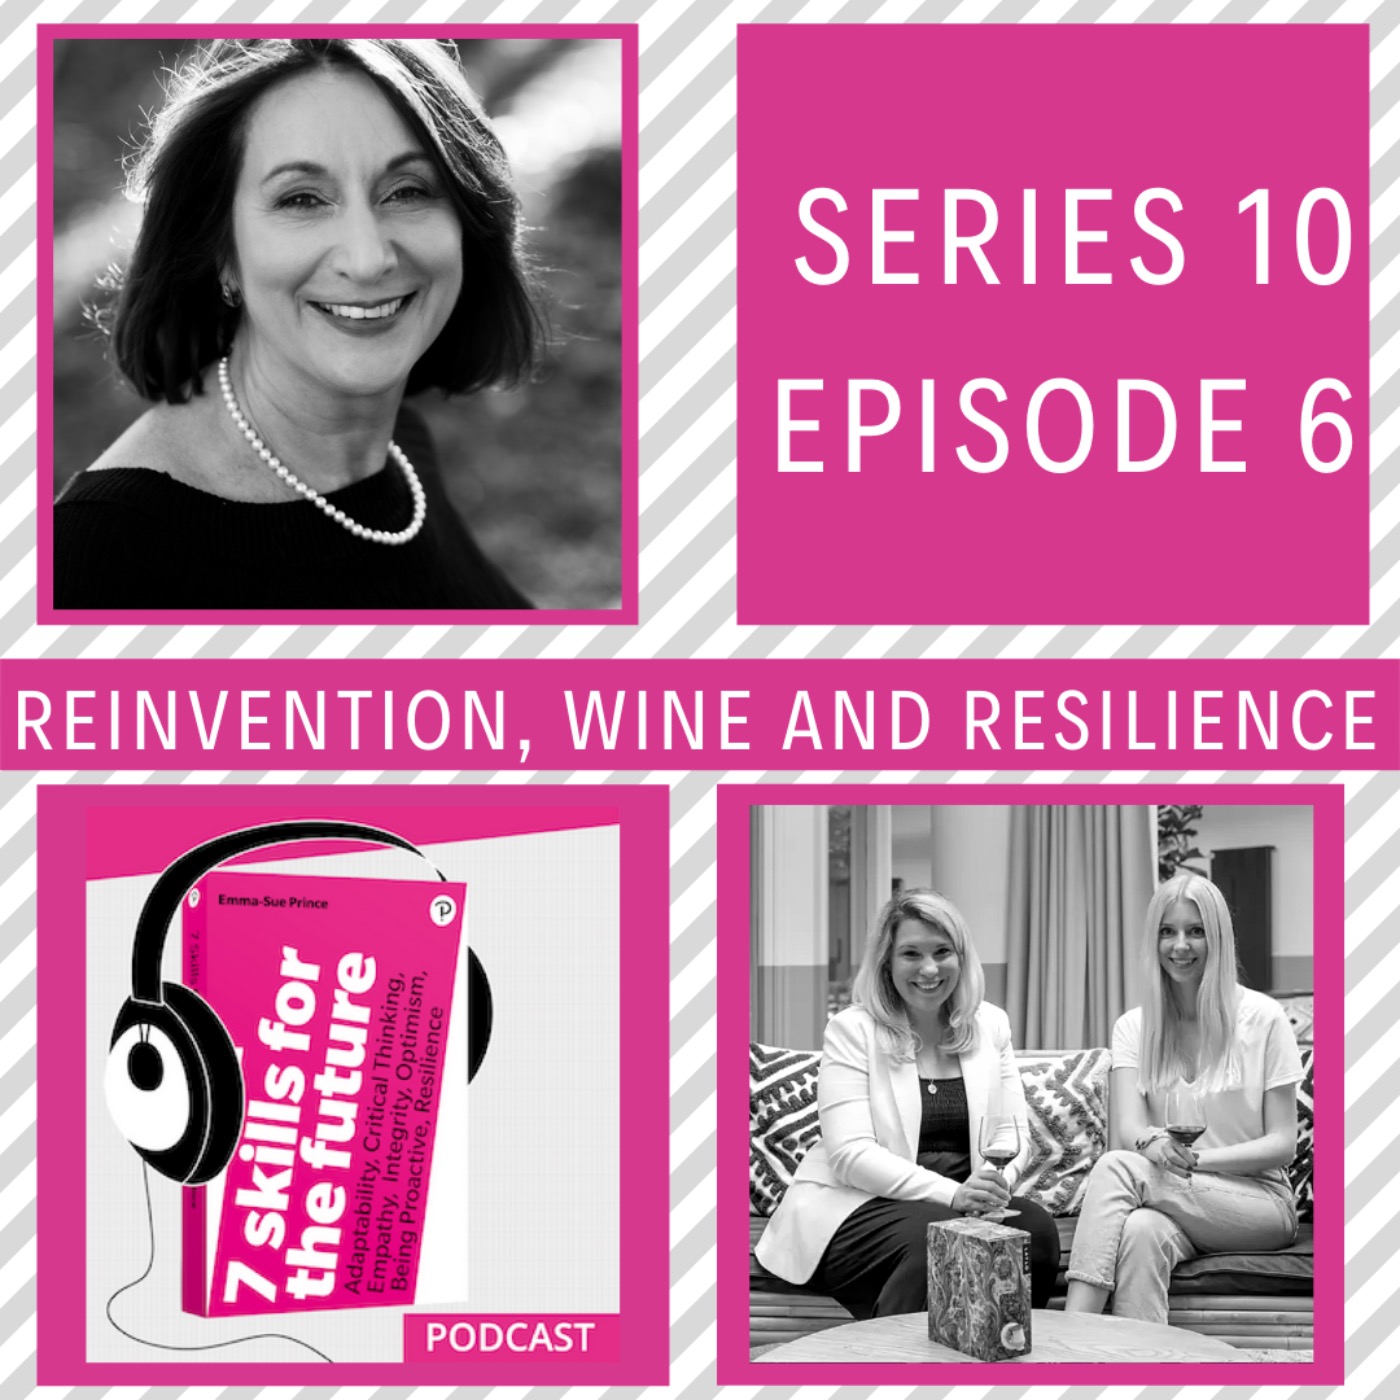 Reinvention, Wine and Resilience